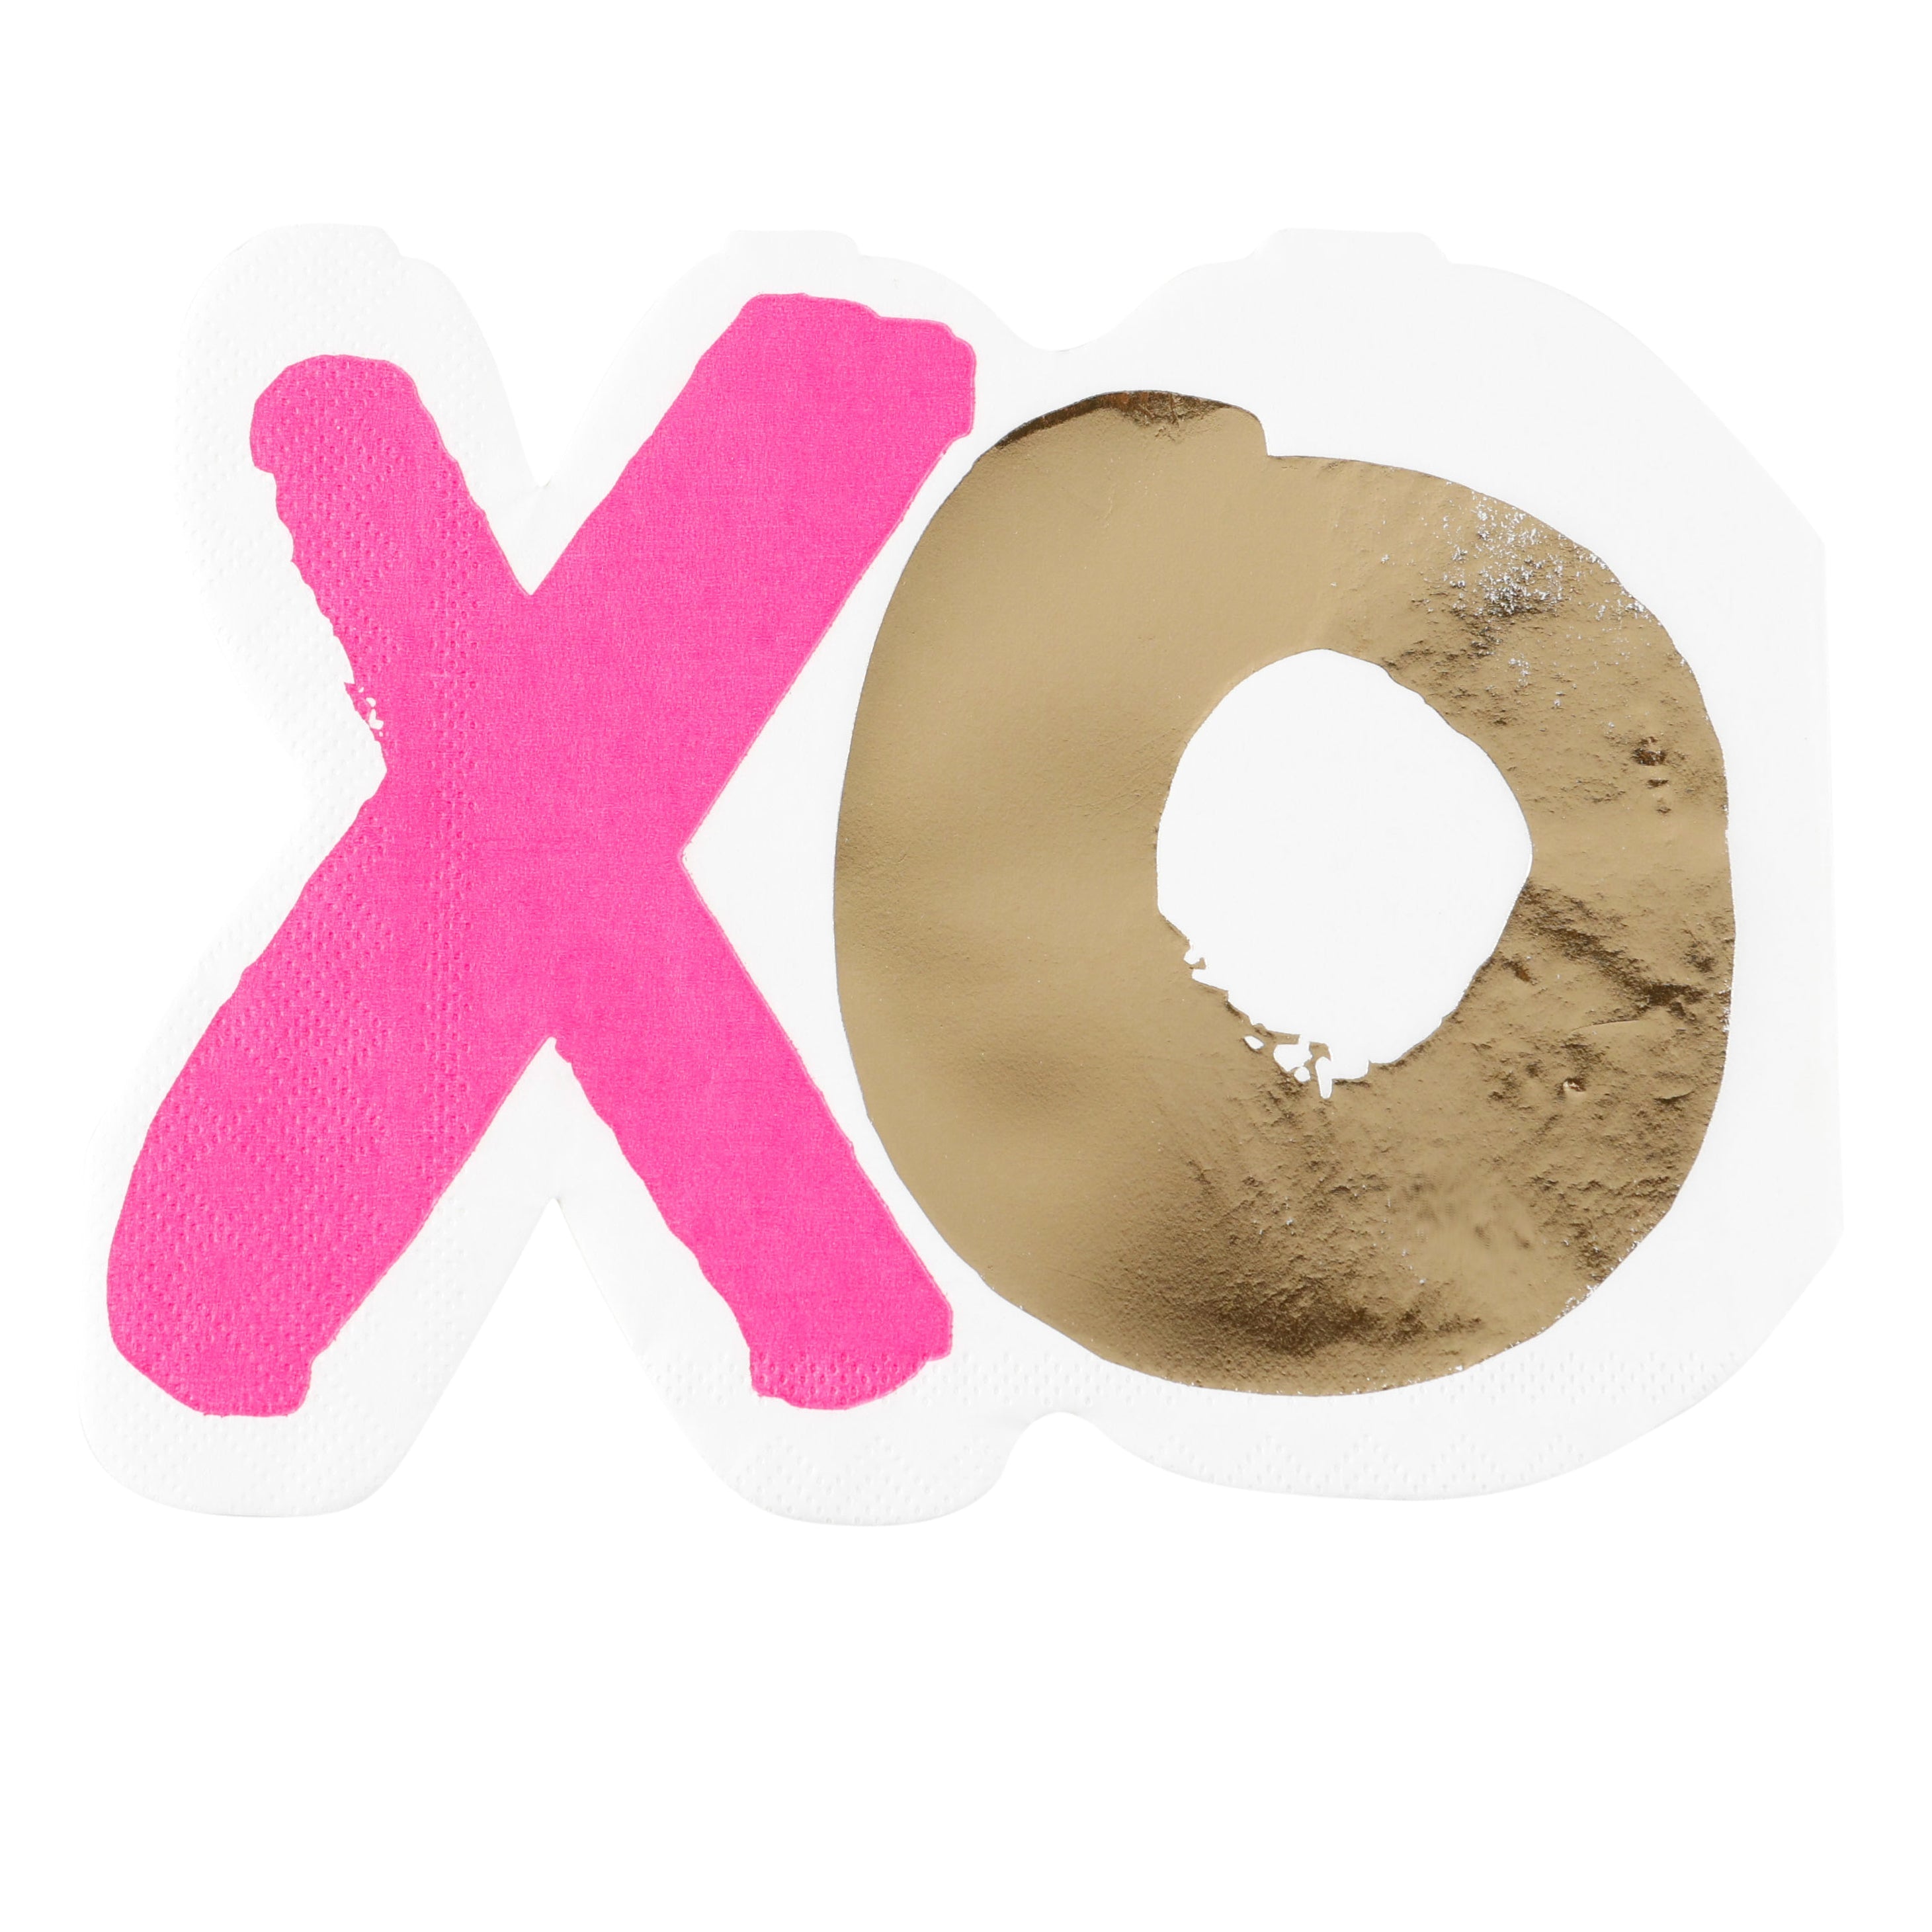 XOXO Party Bundle (1 of each item) – Guess and Company